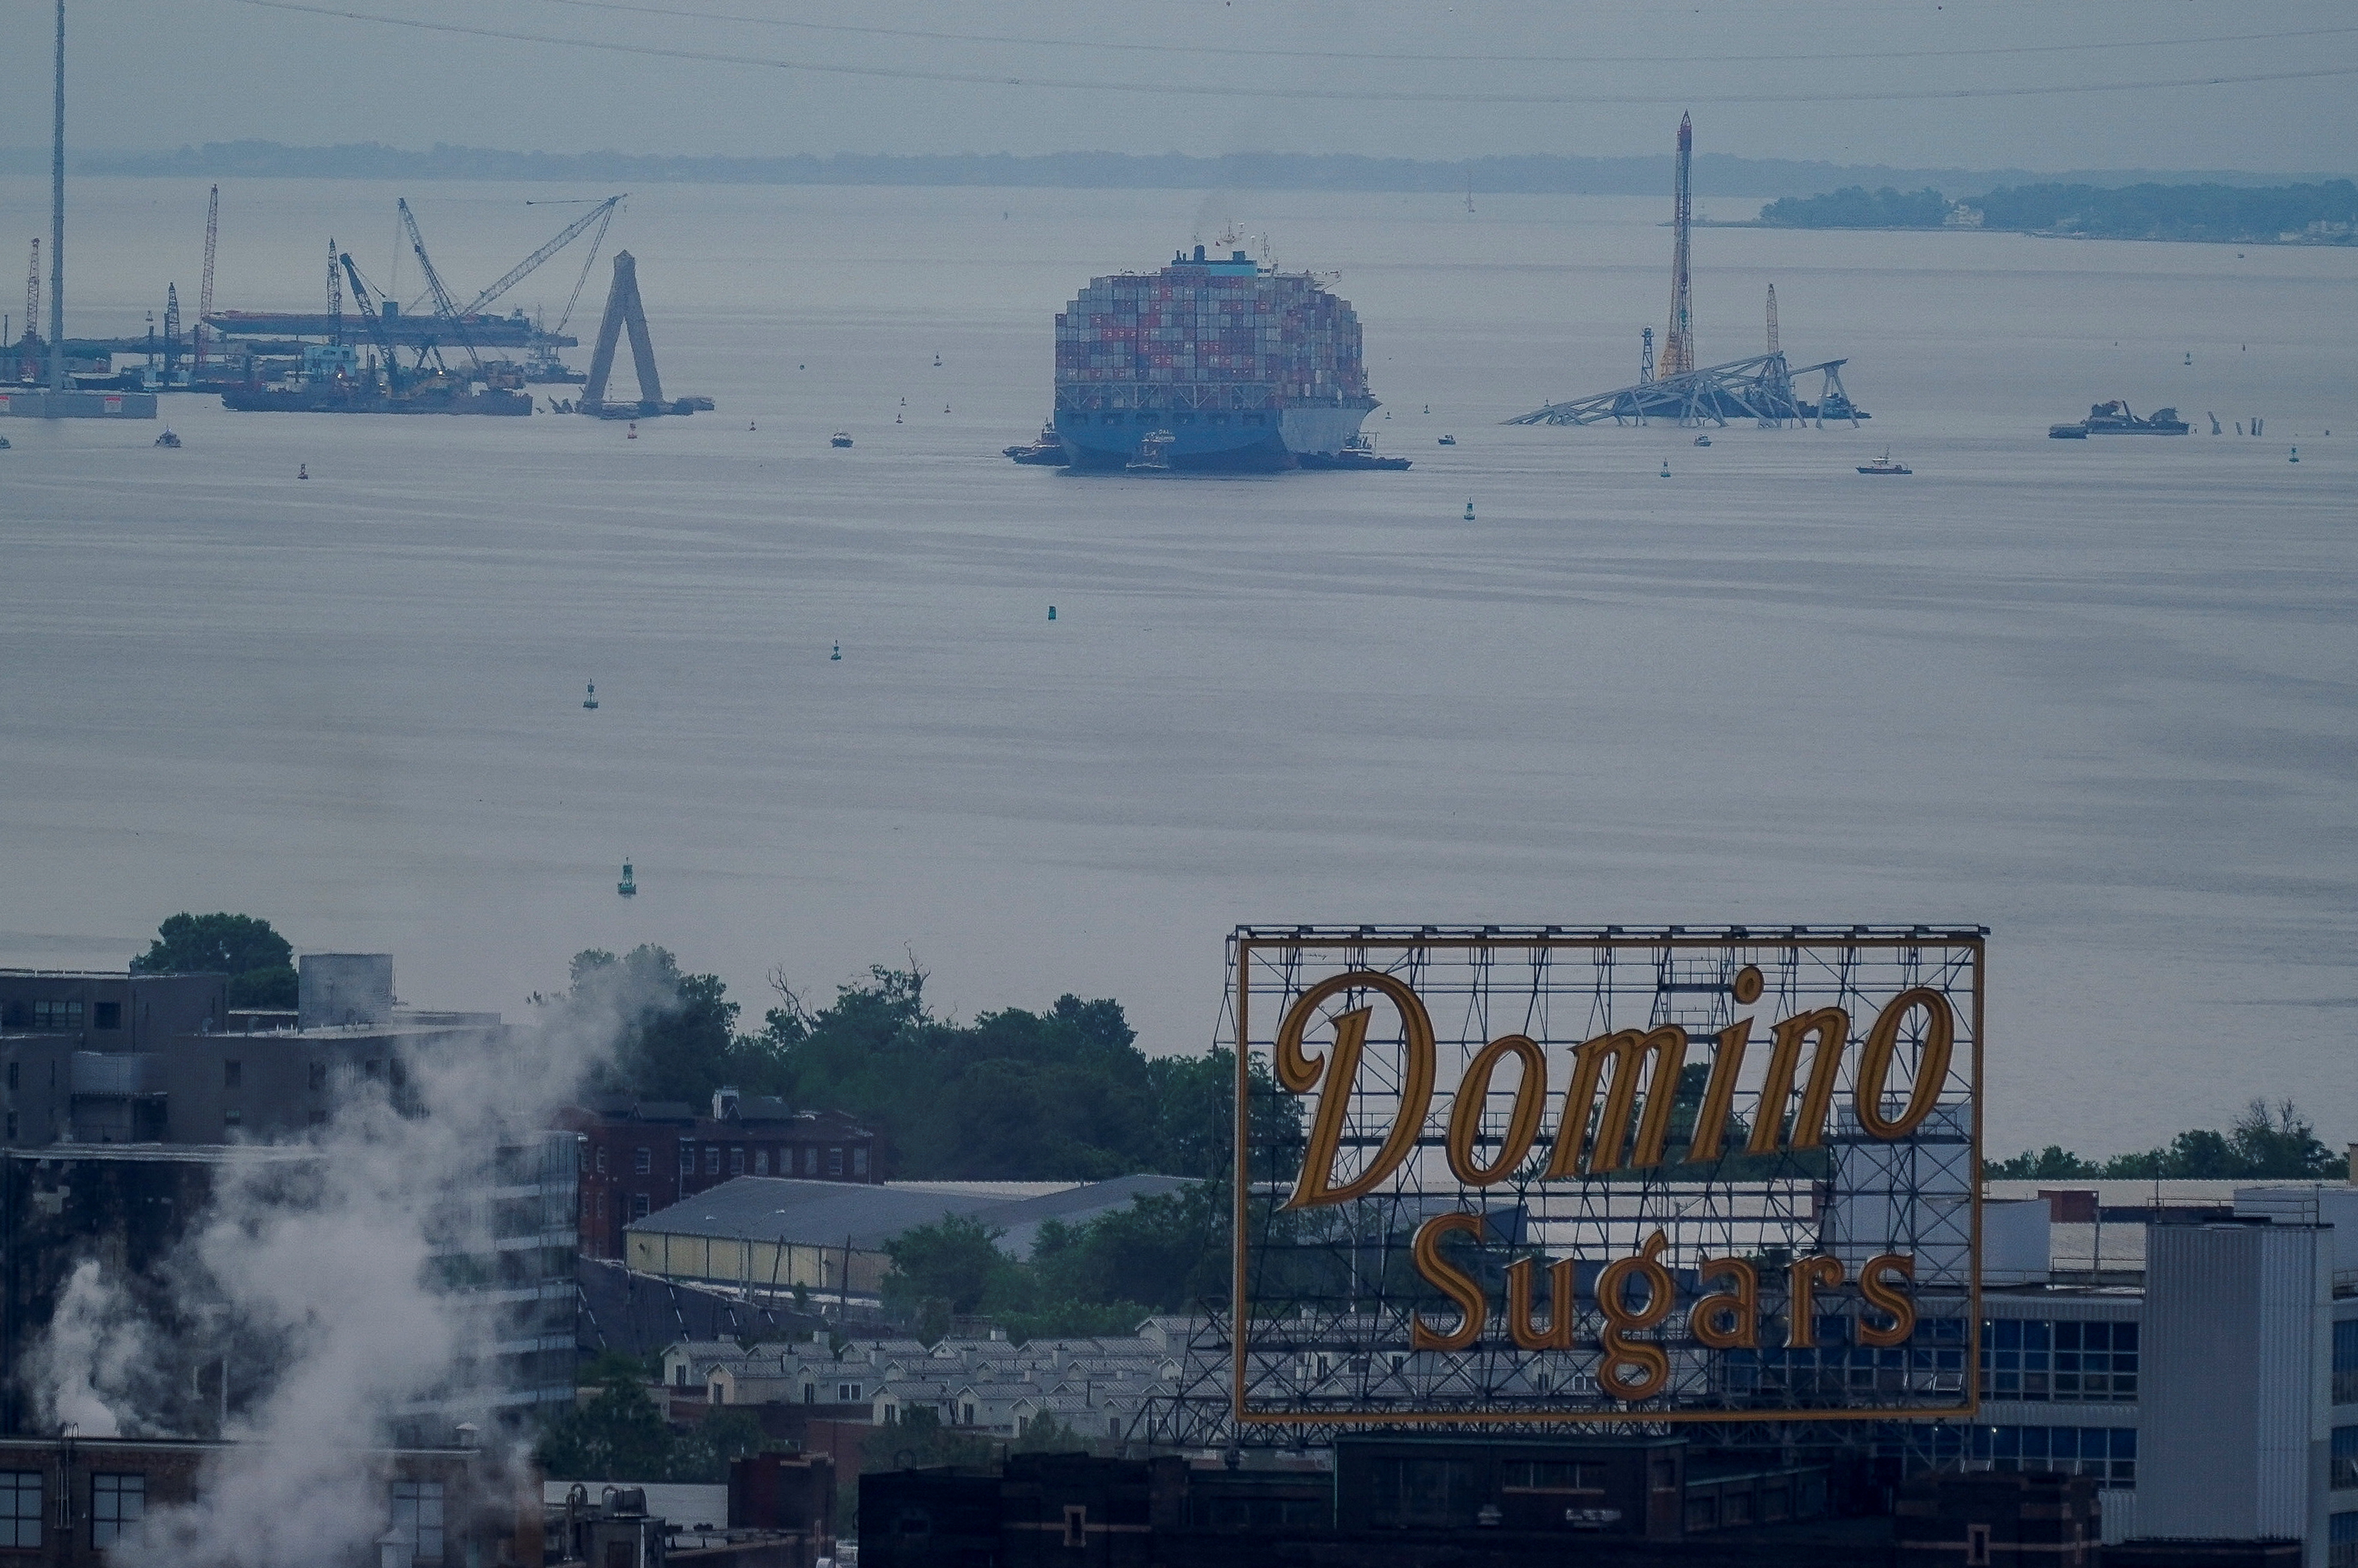 Crews plan to clear the cargo ship Dali from the Francis Scott Key Bridge in Baltimore